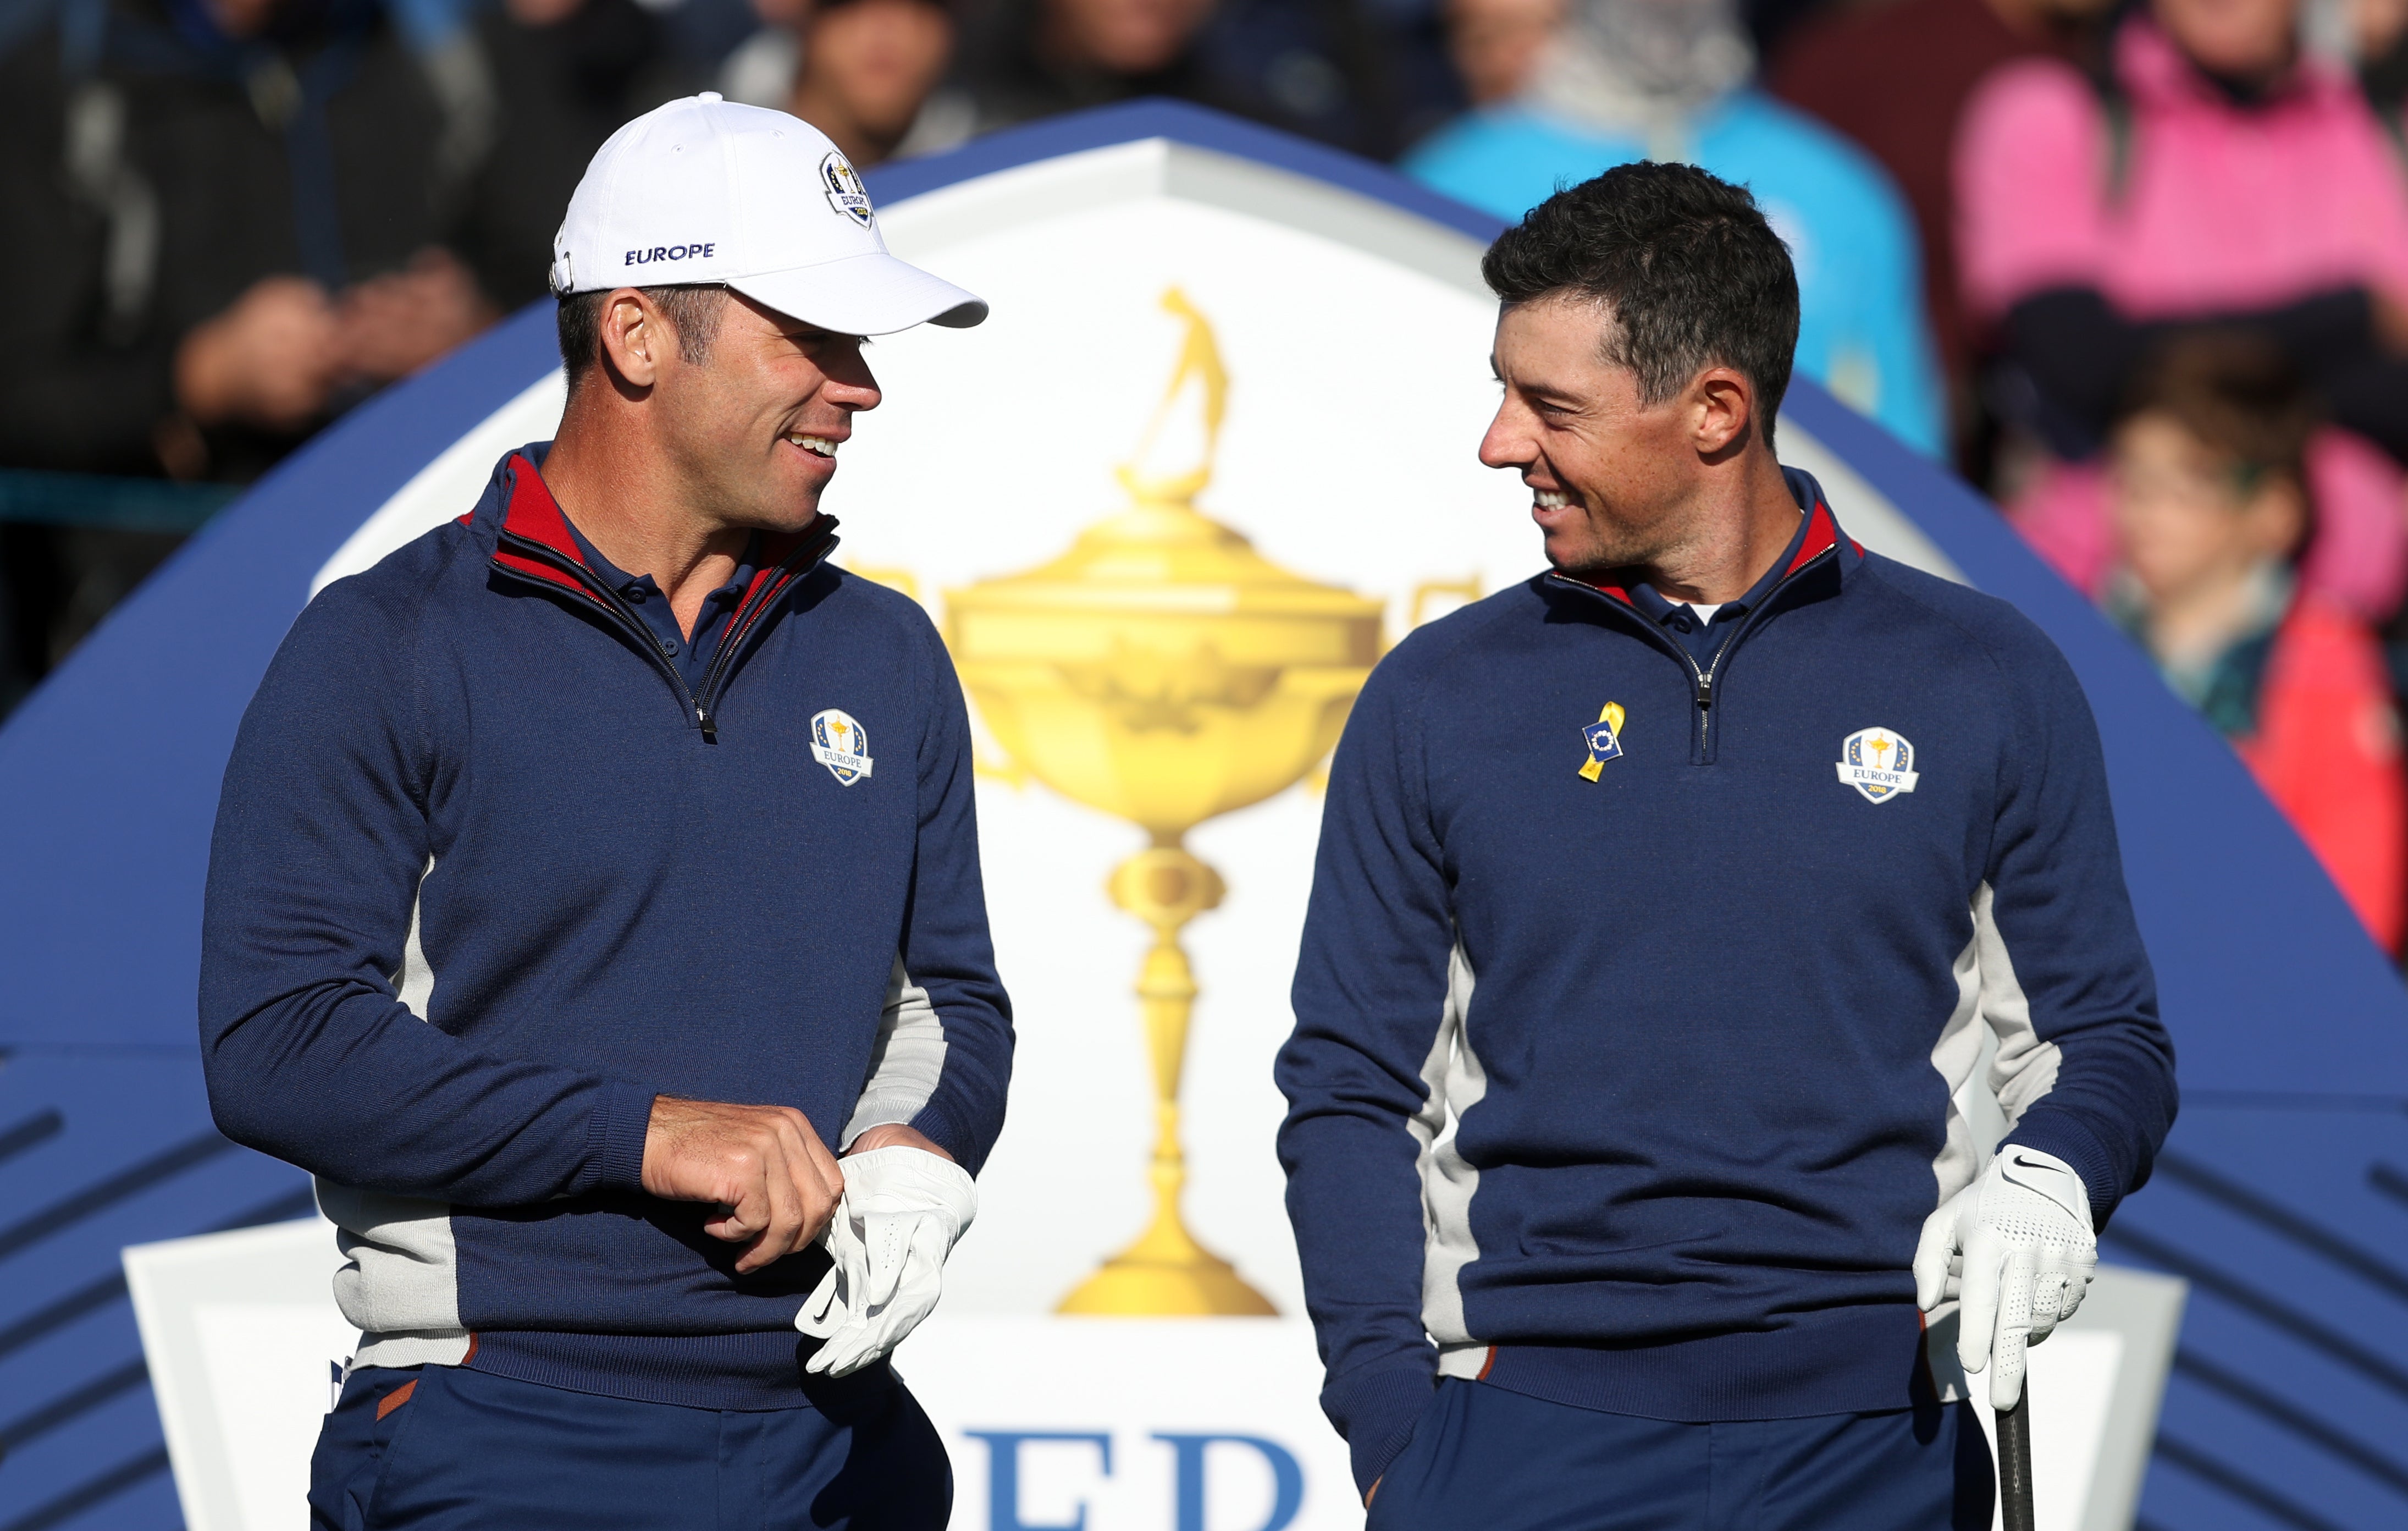 Former Ryder Cup team-mates Paul Casey, left, and Rory McIlroy are in medal contention (David Davies/PA)